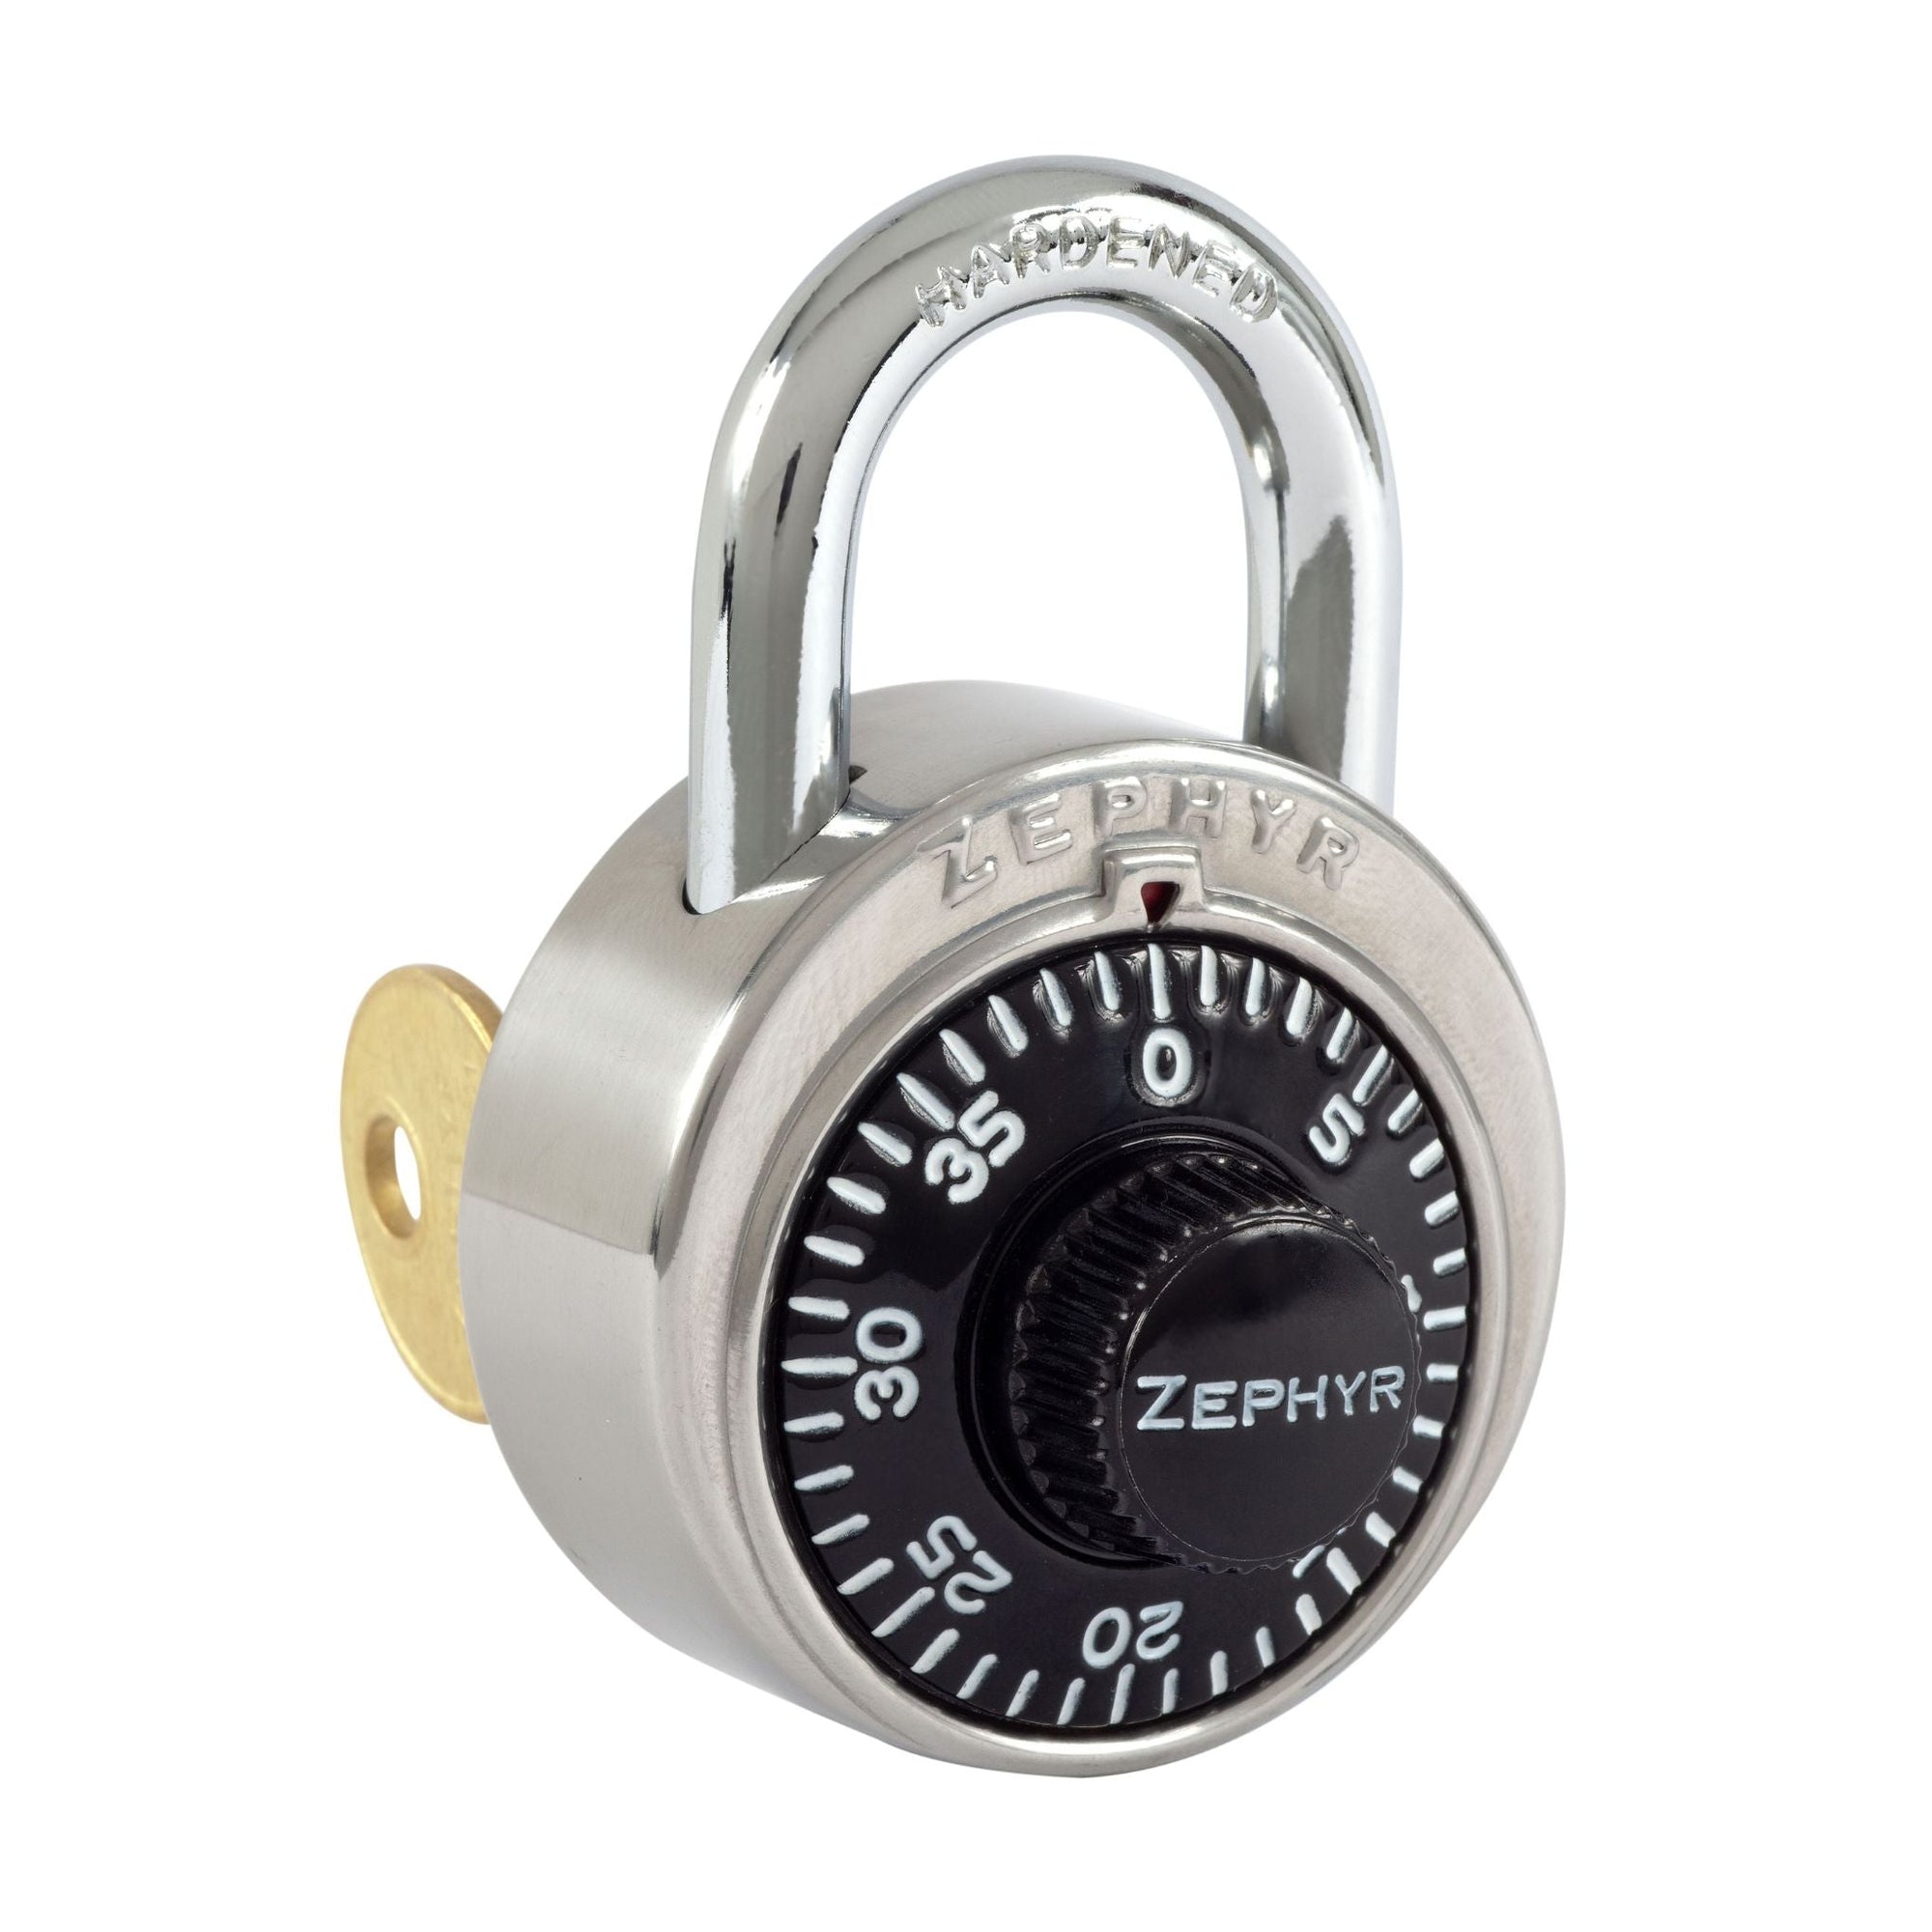 Zephyr Lock 1925 Locker Locks Feature 3-Digit Dialing (Black Dial) With Control Key Override for Supervisory Access - The Lock Source